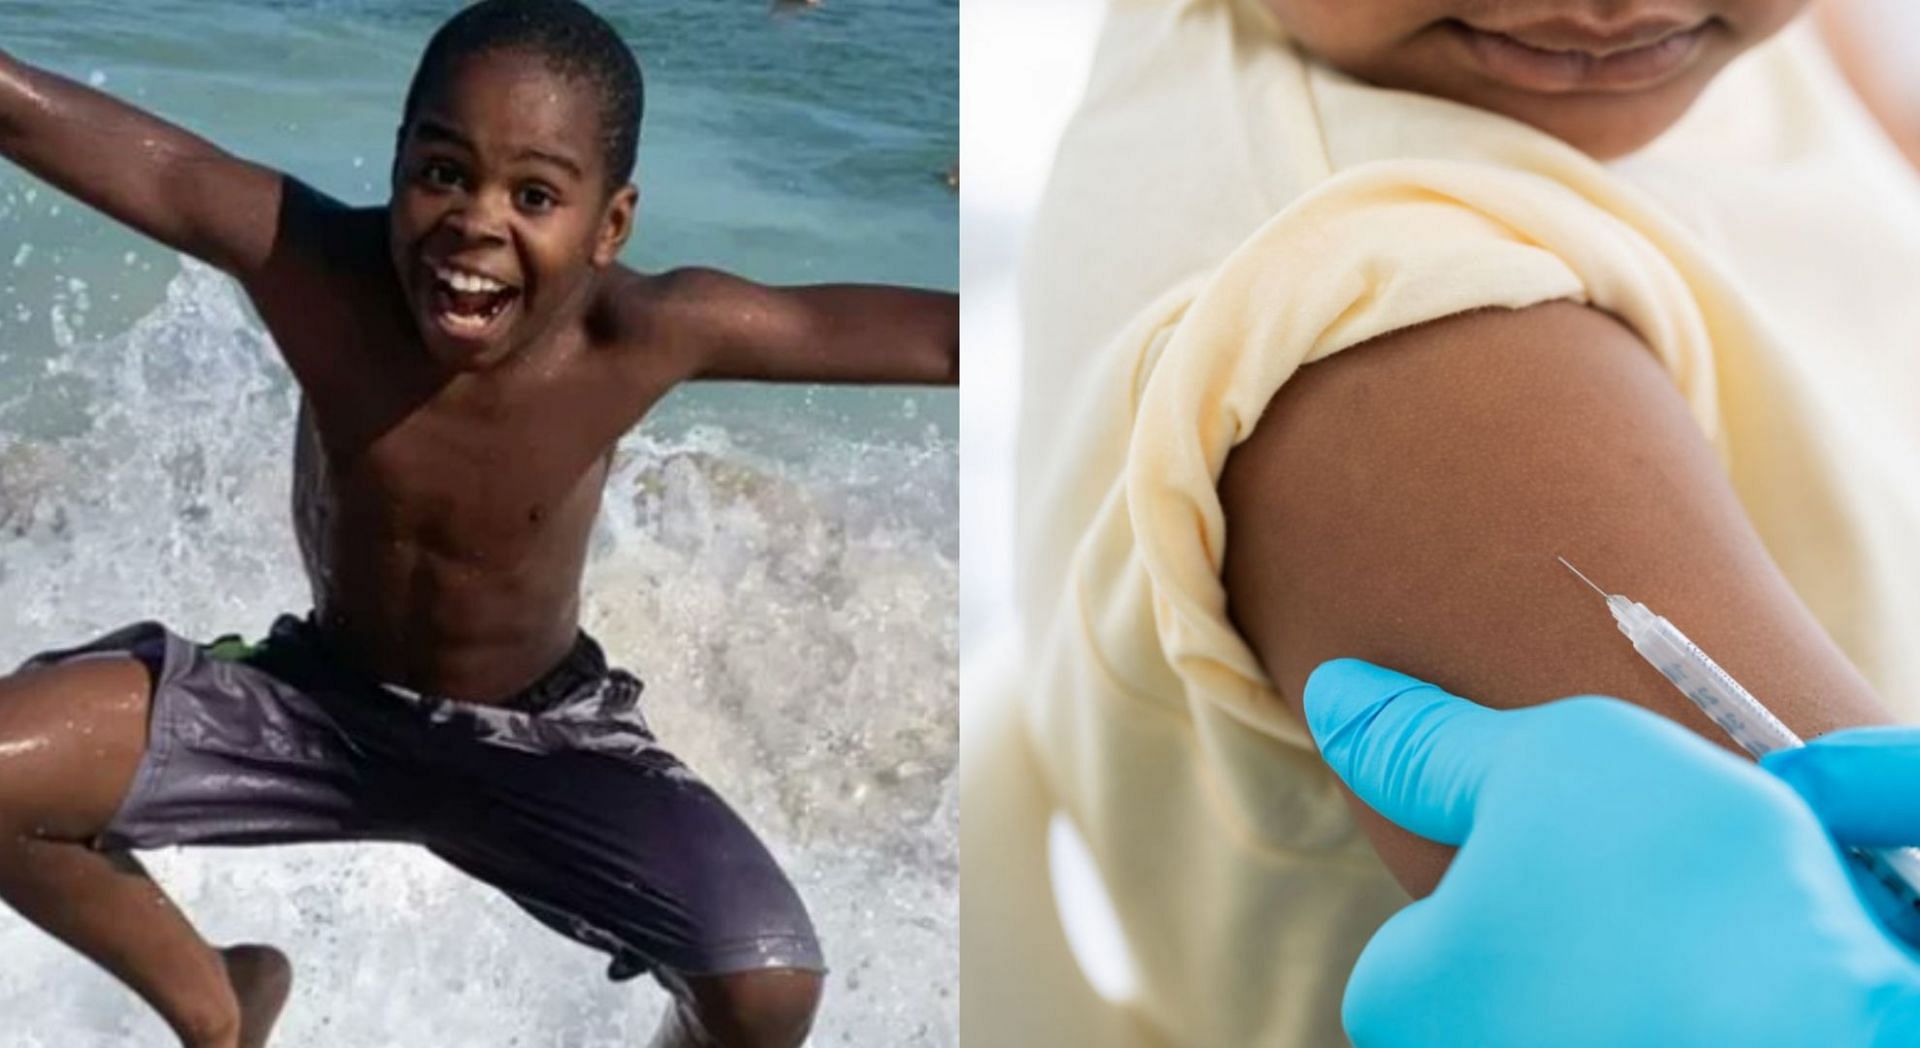 12 year old football player dies Vaccine fears surface in wake of